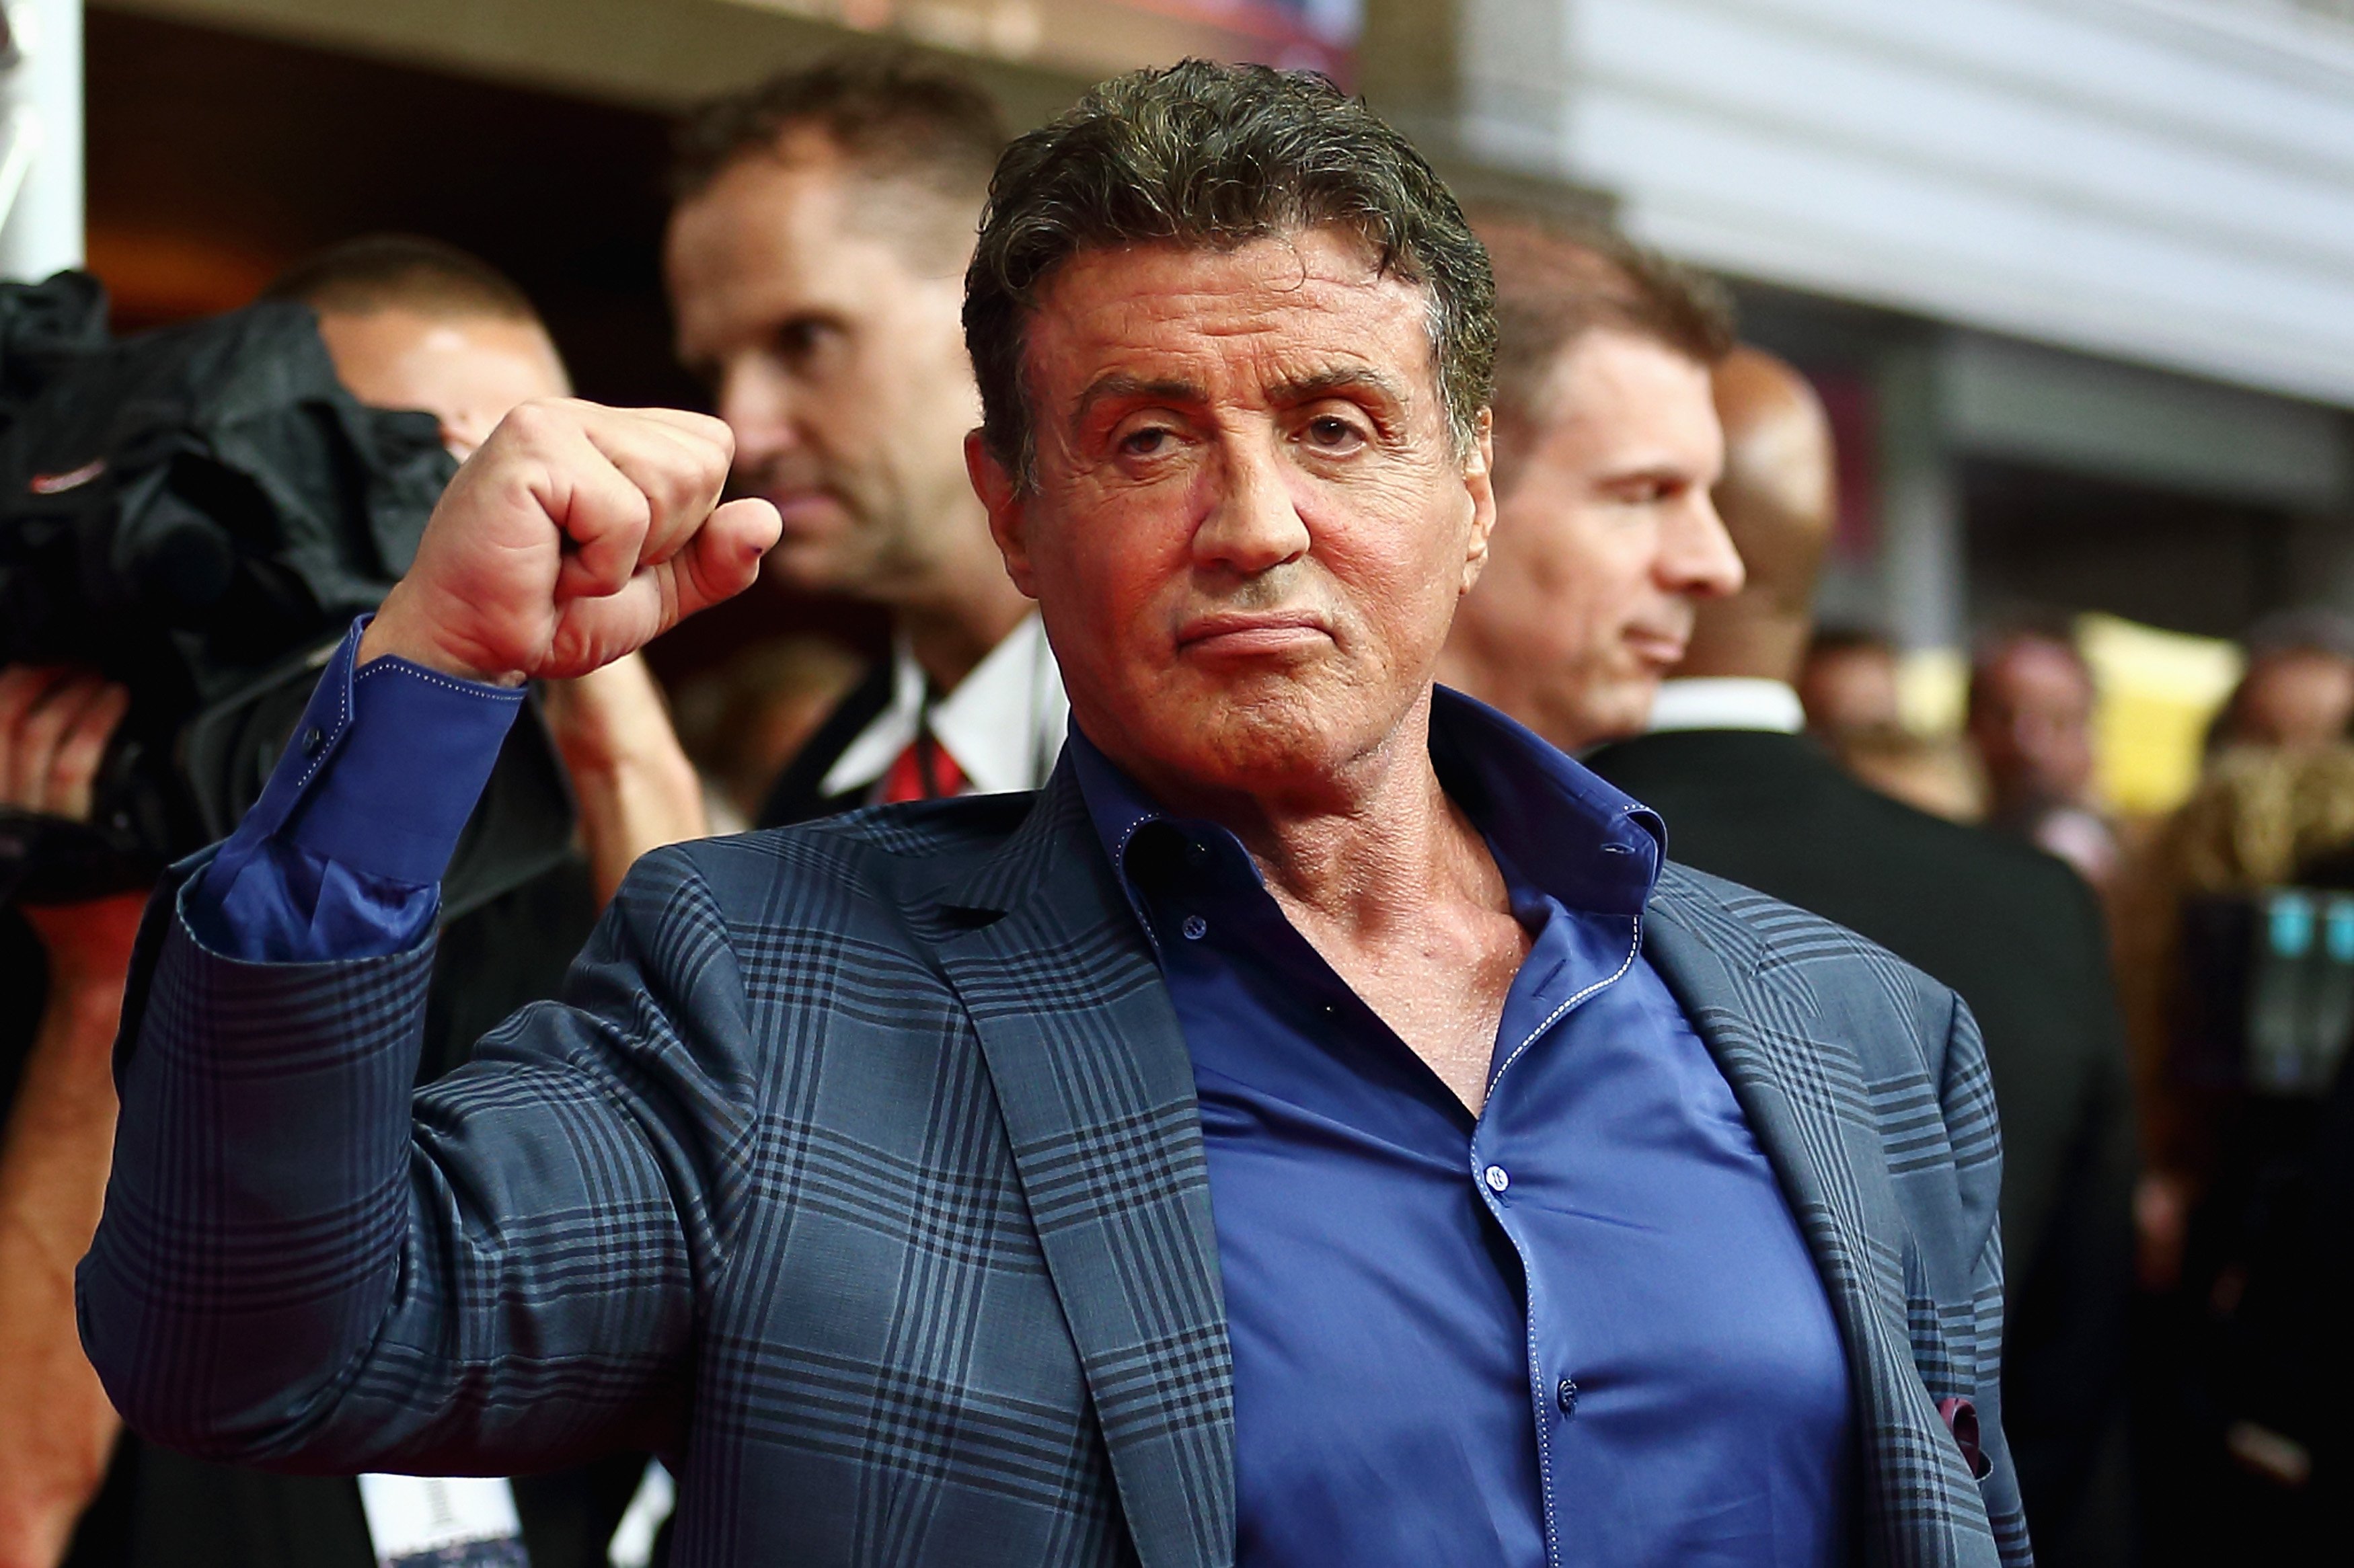 Sylvester Stallone am 6. August 2014 in Köln.  |  Quelle: Getty Images